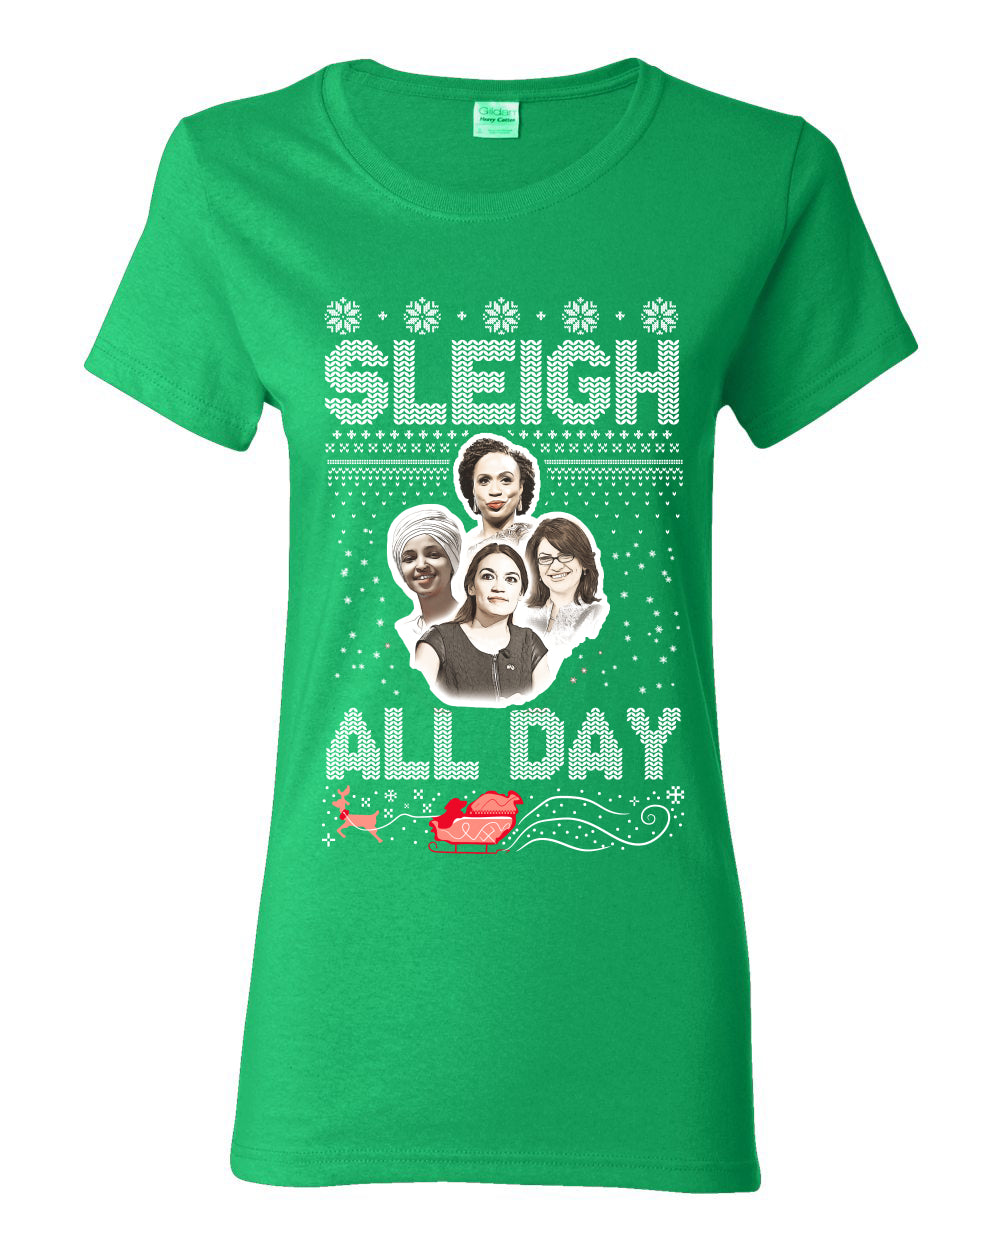 AOC The Squad Congresswomen Sleigh All Day Xmas Ugly Christmas Sweater Womens Graphic T-Shirt